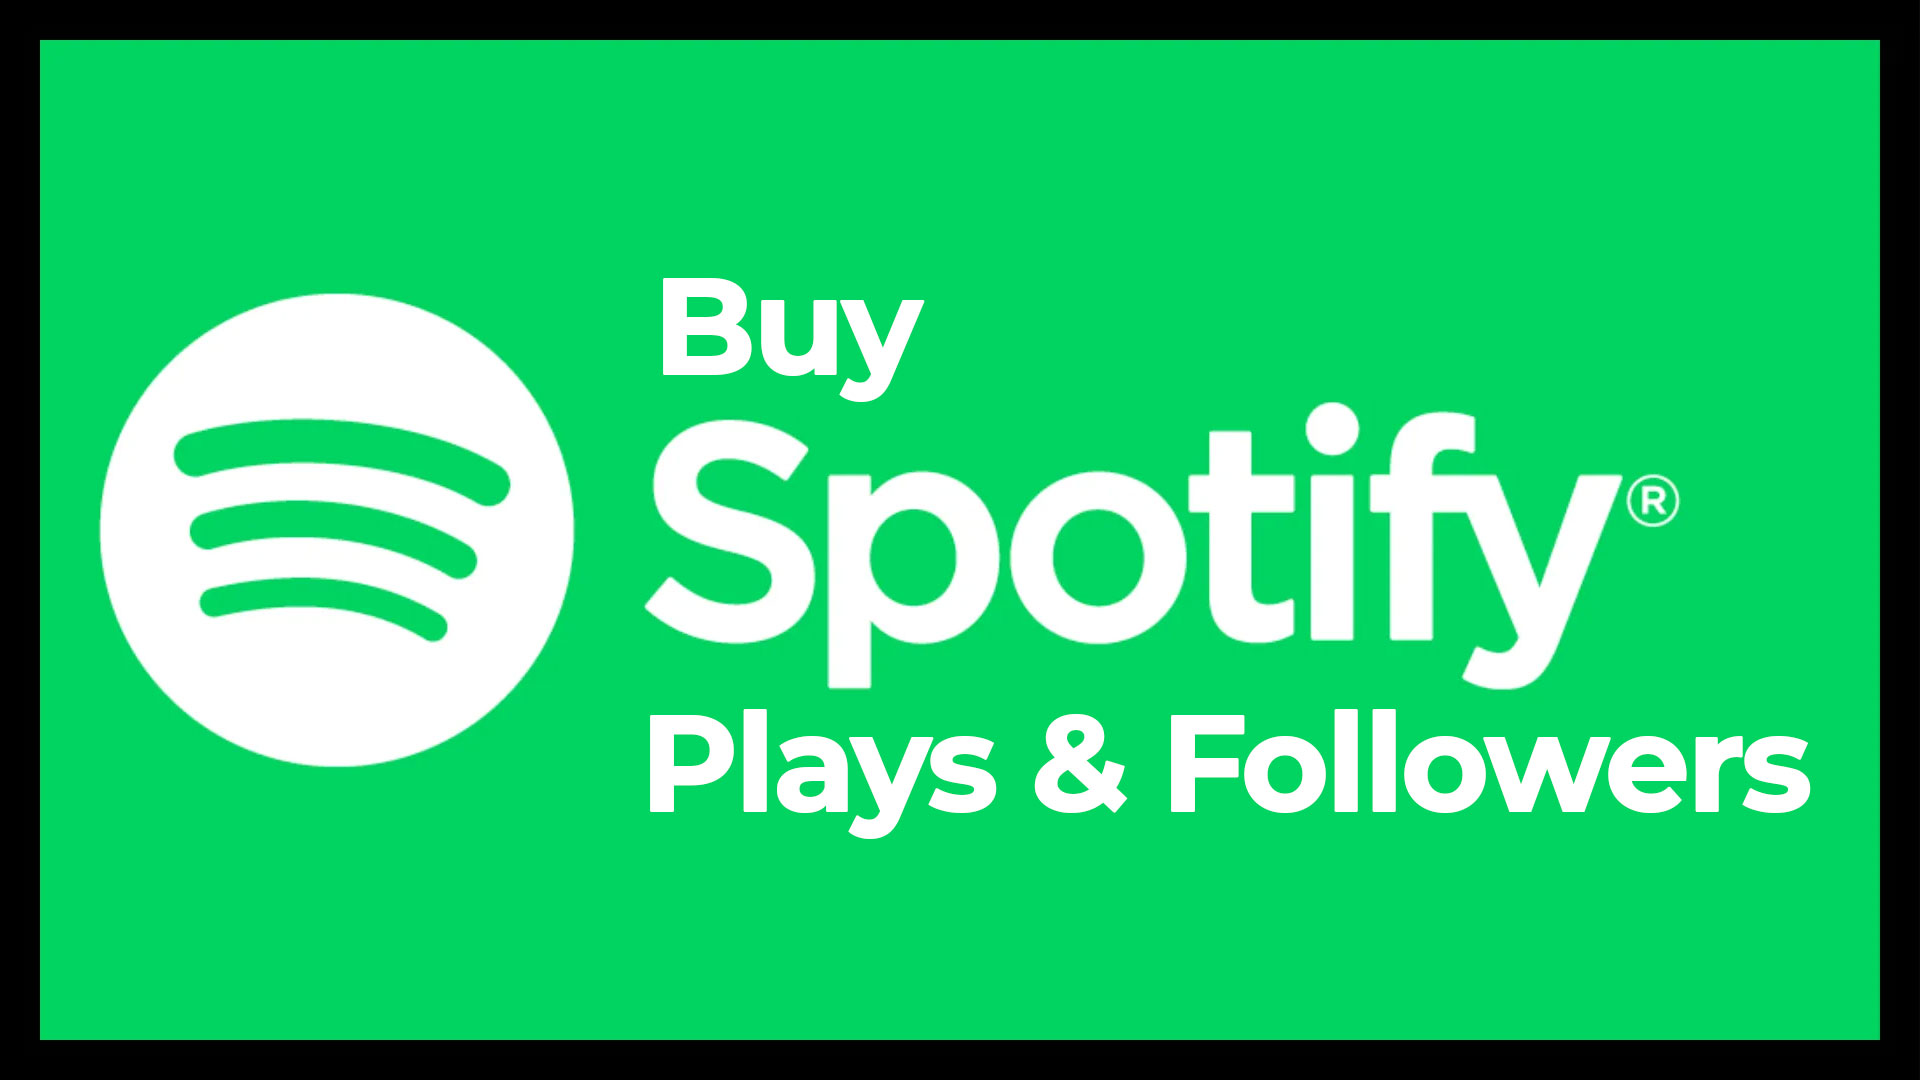 How To Boost Your Spotify Followers And Plays